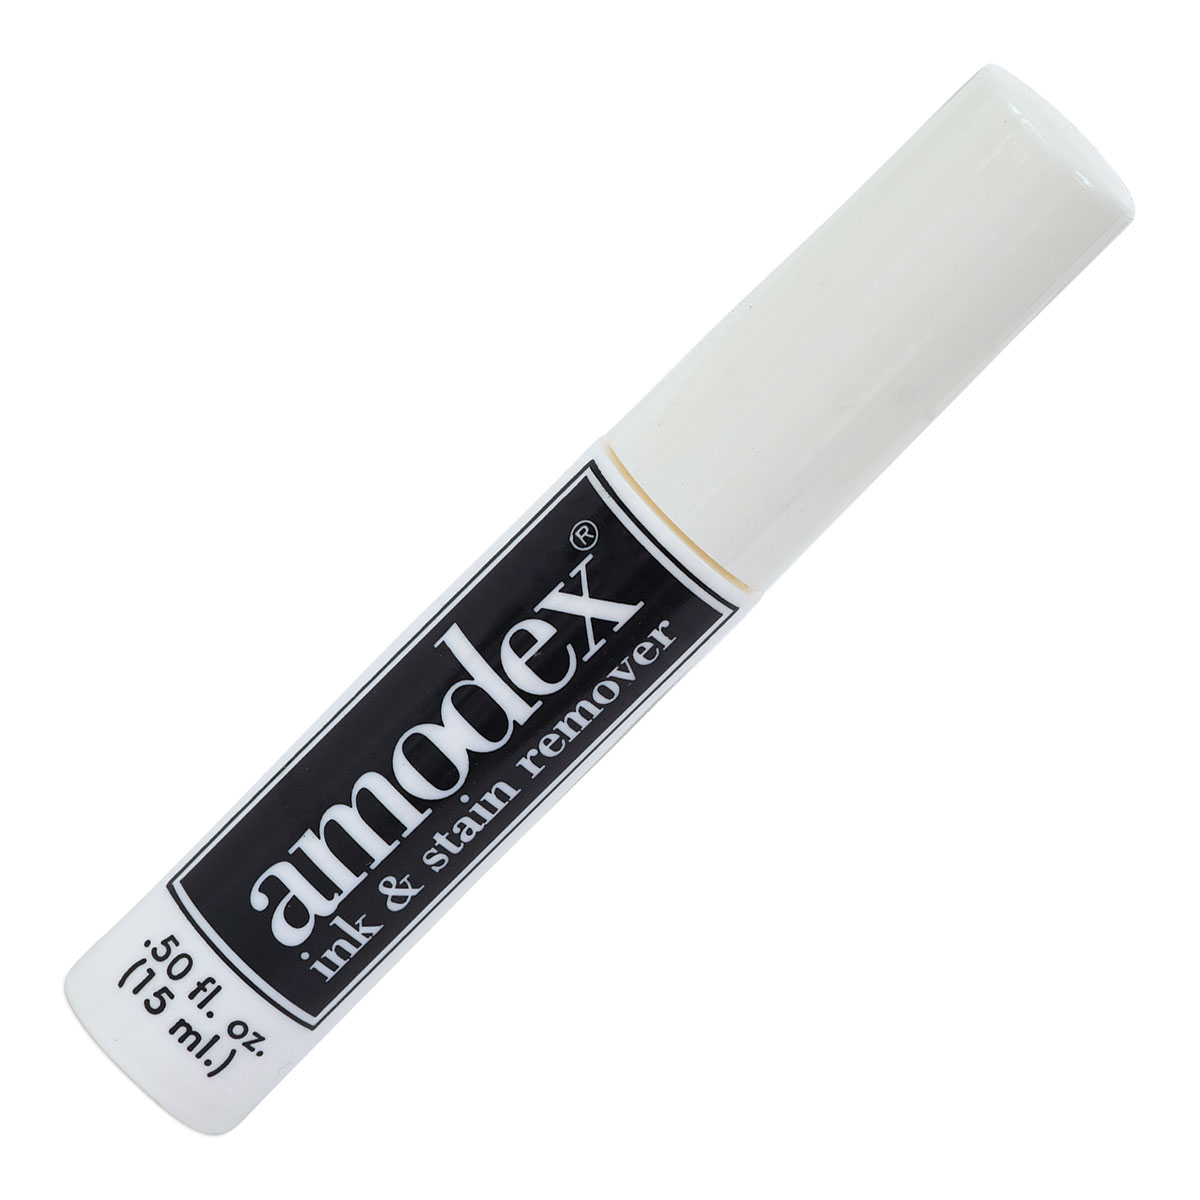 Amodex 0.5 oz Ink & Stain Remover